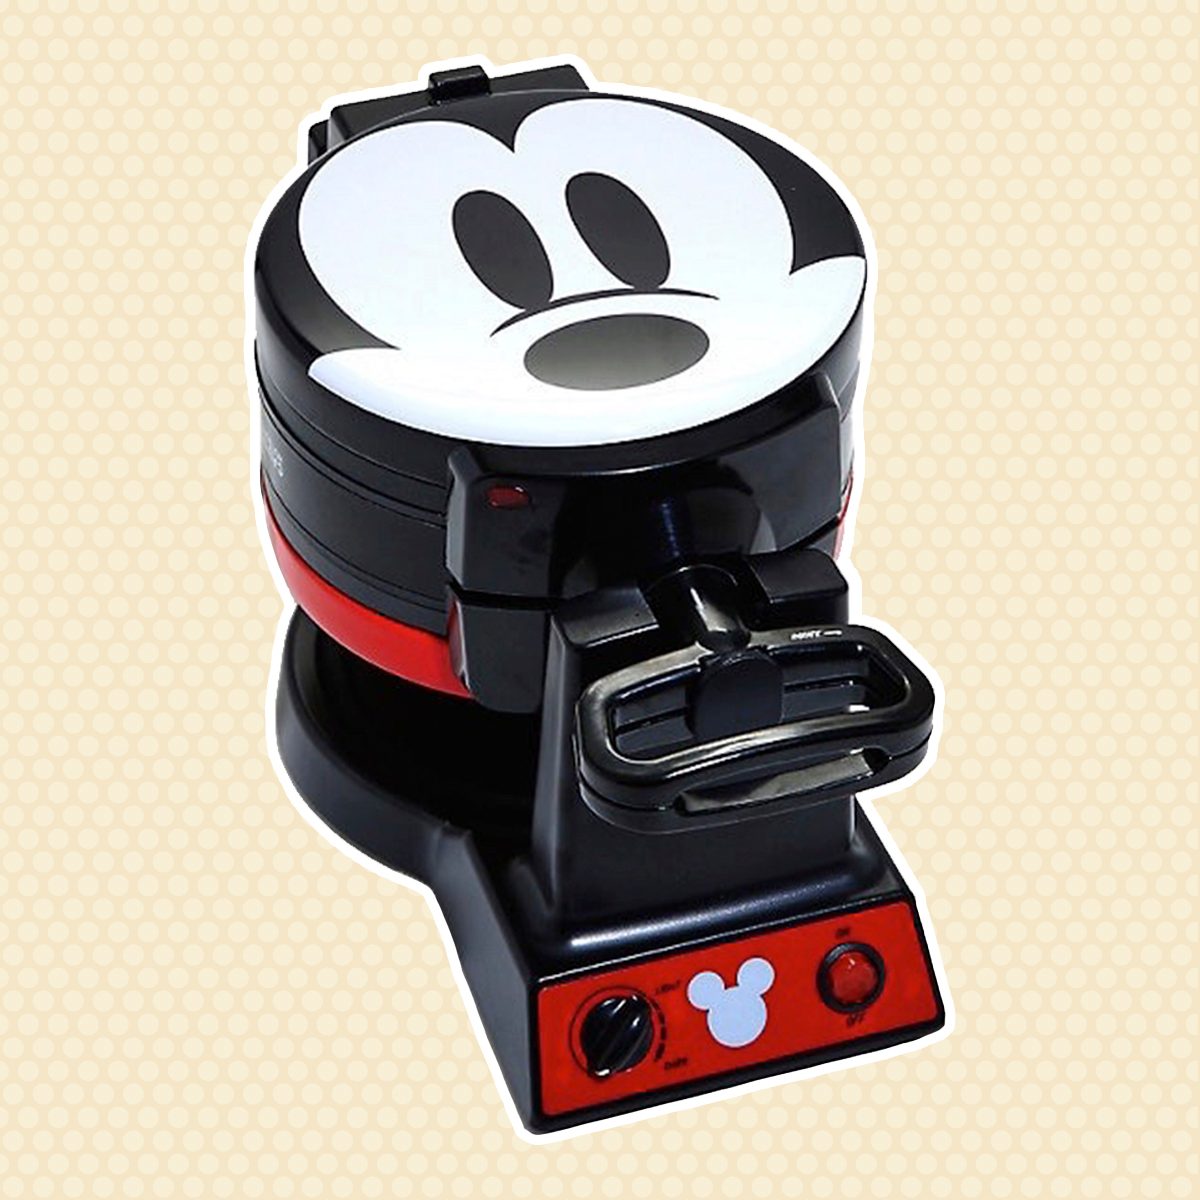 https://www.tasteofhome.com/wp-content/uploads/2020/07/mikey-mouse-waffle-maker.jpg?fit=700%2C700